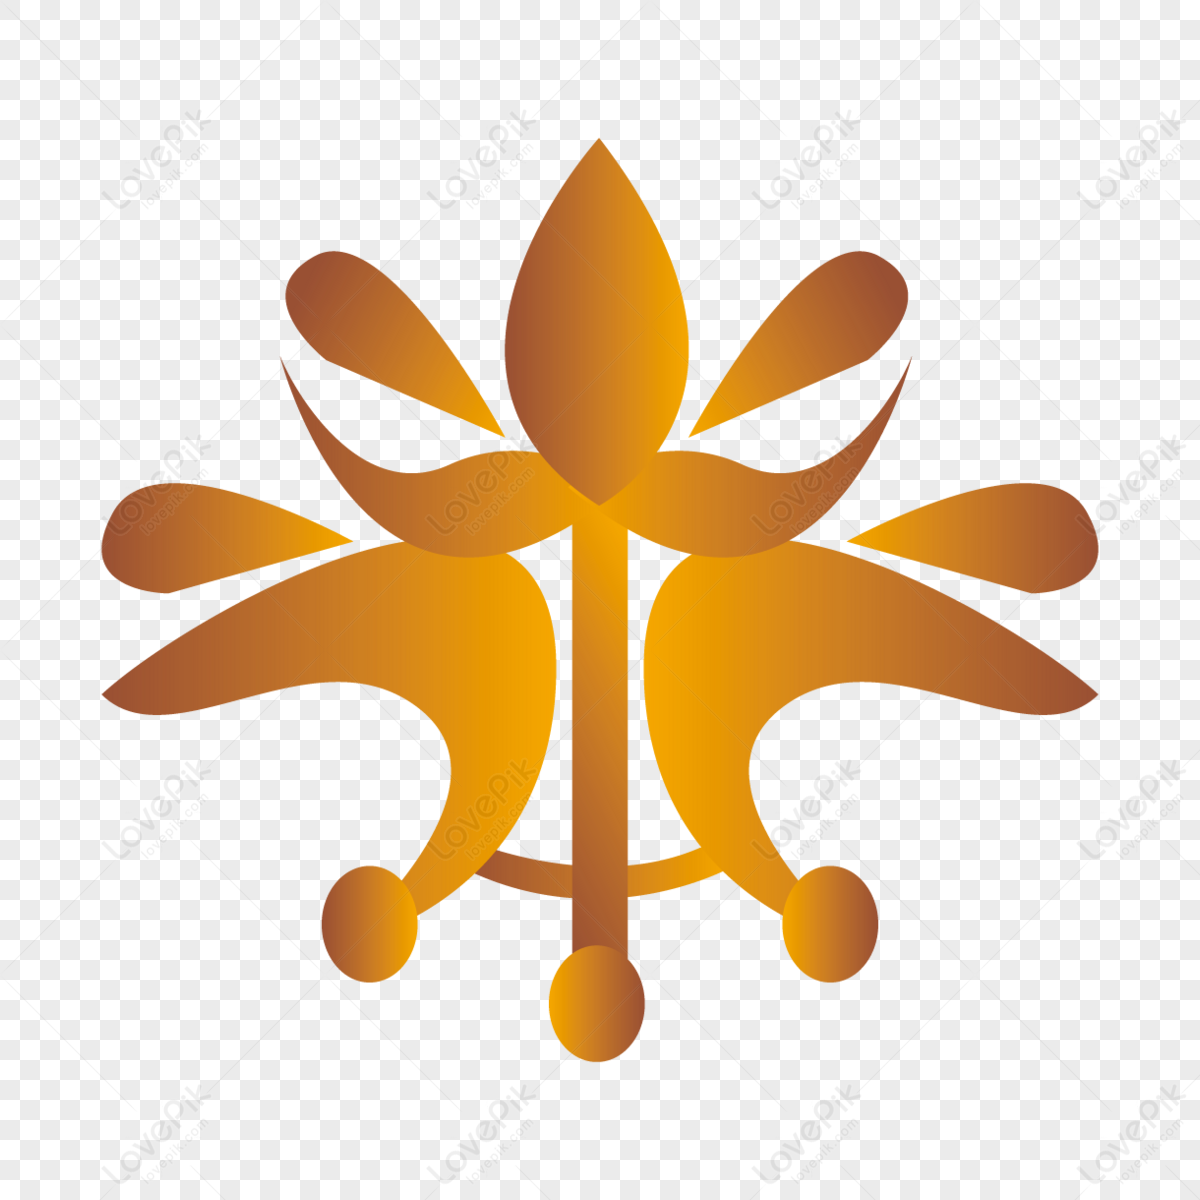 Royal Shield Logo PNG Images With Transparent Background | Free ...